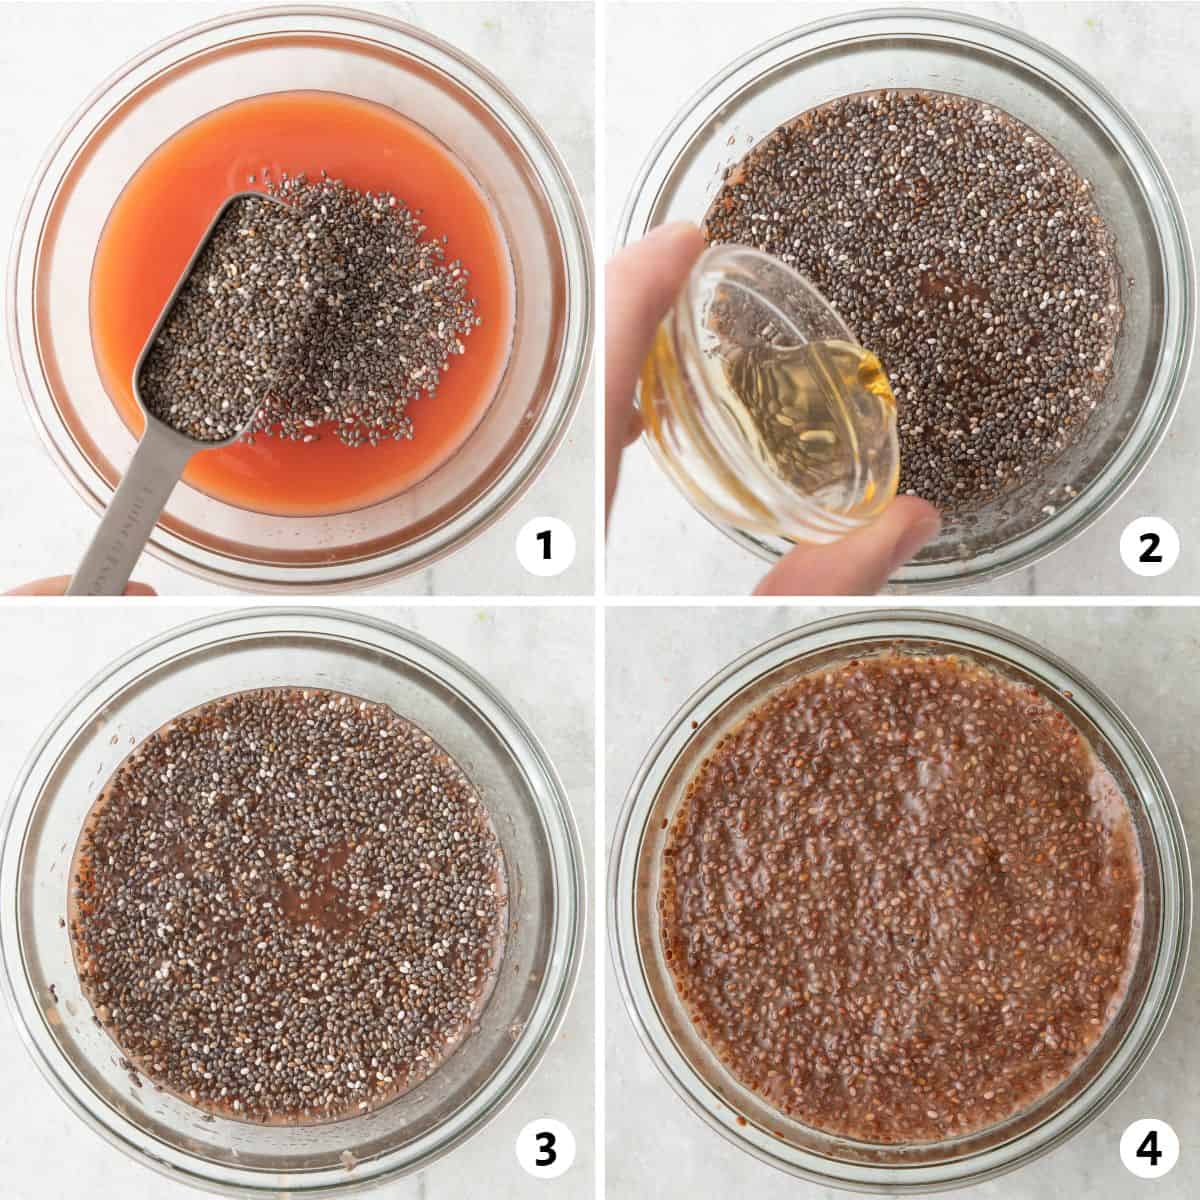 4 image collage making recipe: 1- fruit juice in a small bowl with chia seed being sprinkled on top, 2- honey being added, 3- after mixture is stirred well, 4- after recipe has been chilled and the chia seeds are plump and gelatinous.